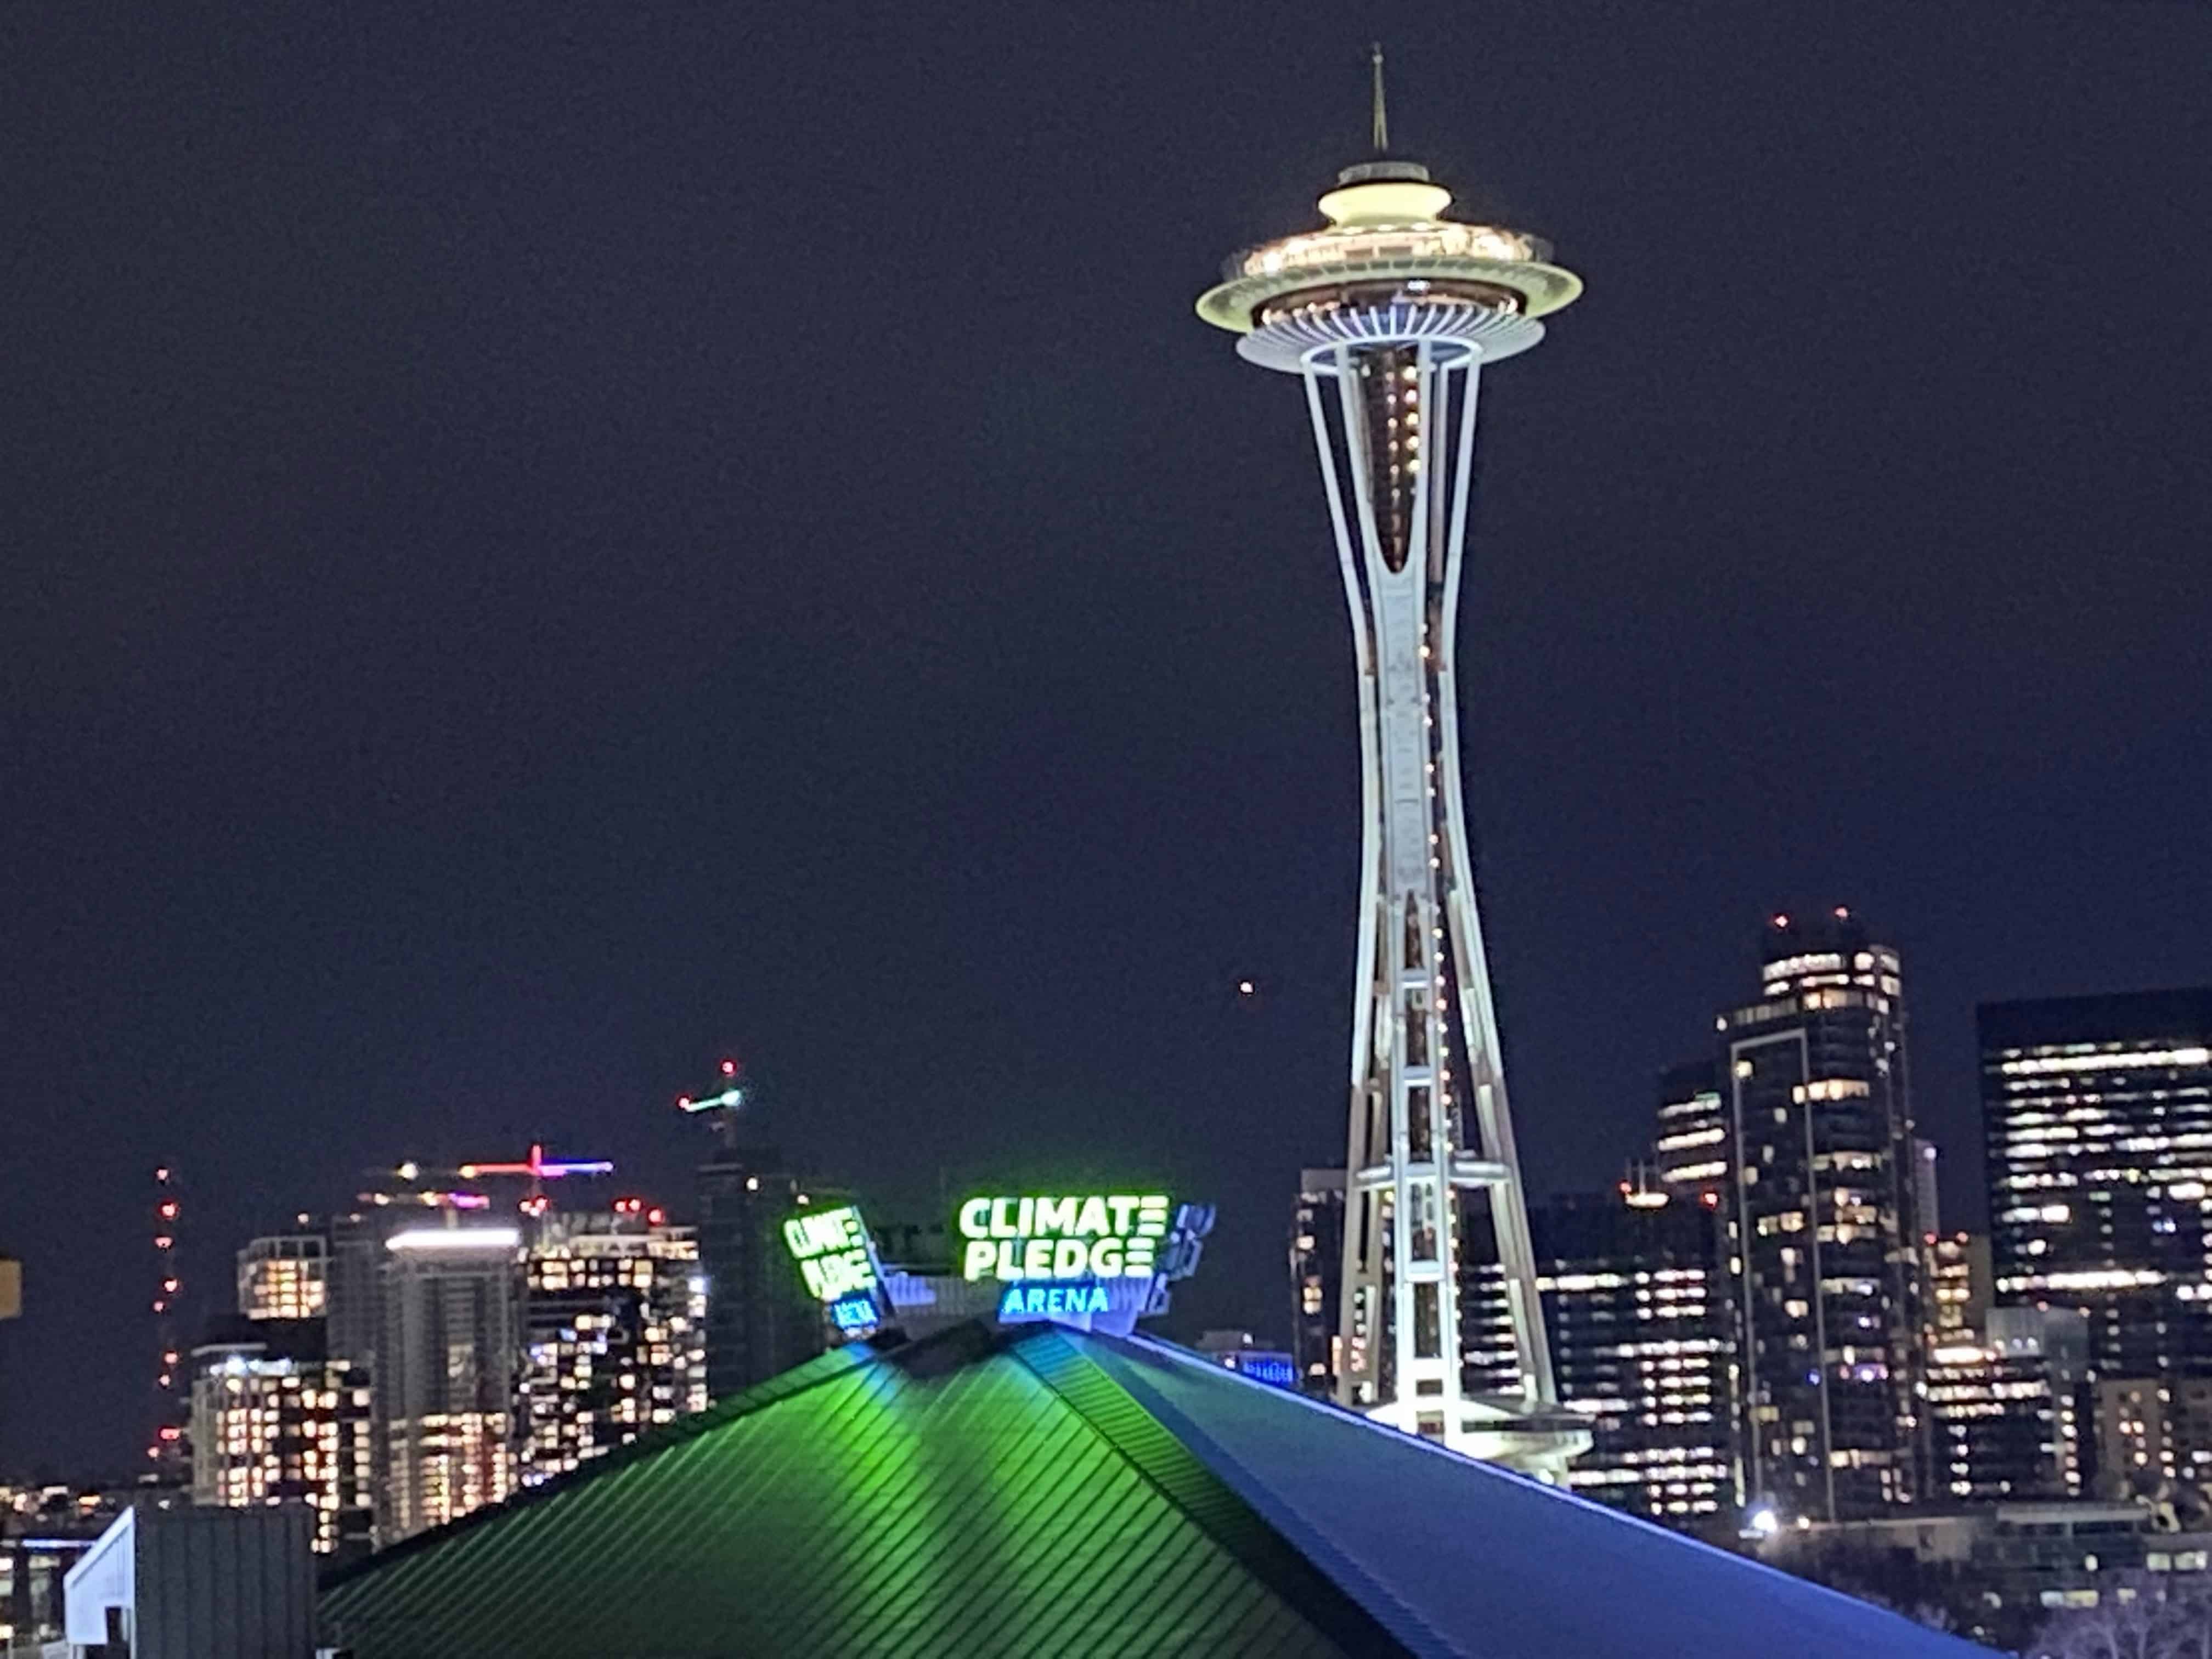 Seattle Space Needle looking over Climate Pledge Arena